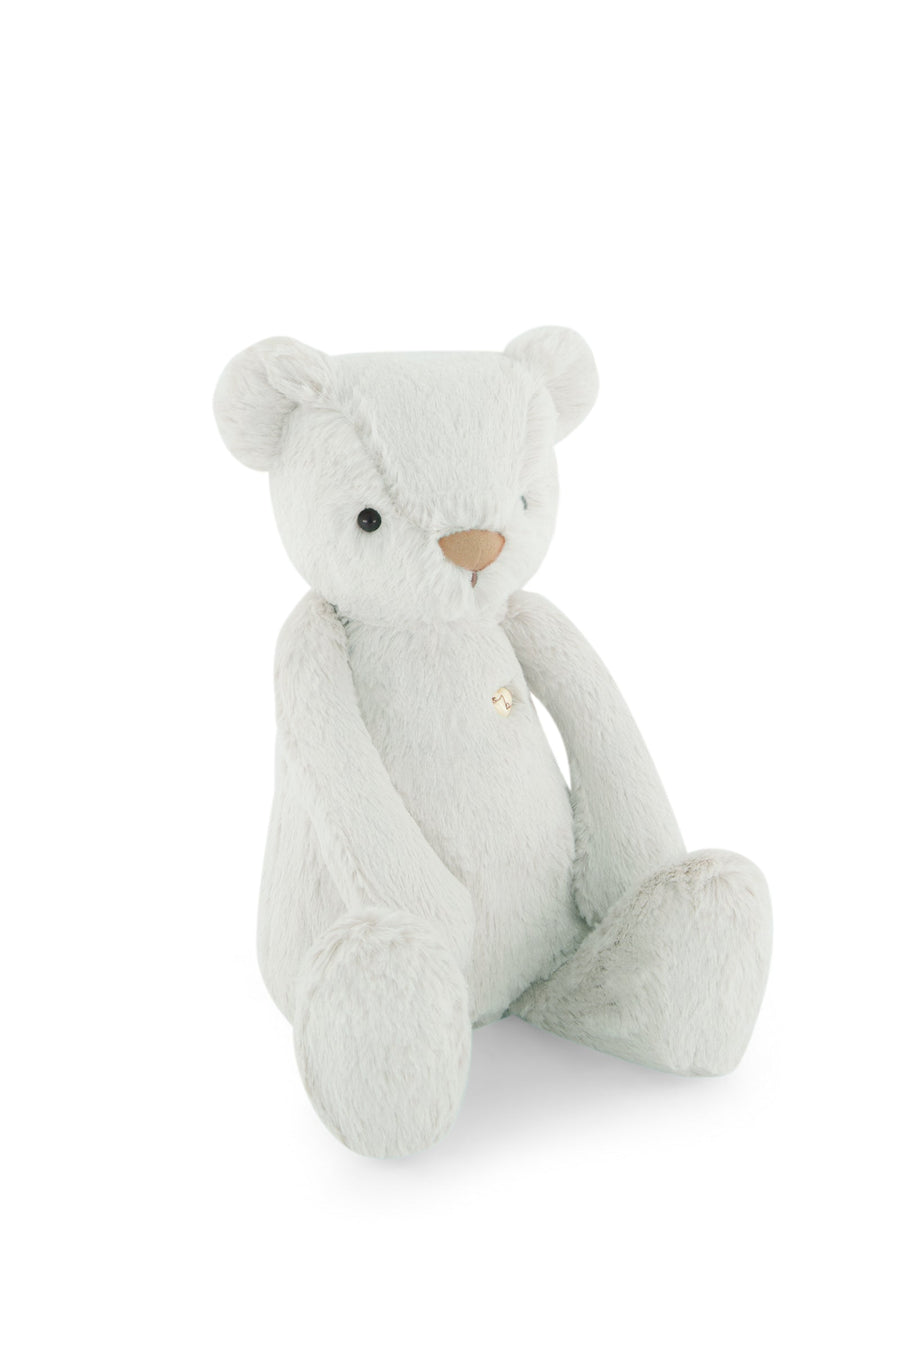 Snuggle Bunnies - George the Bear - Willow Childrens Toy from Jamie Kay NZ